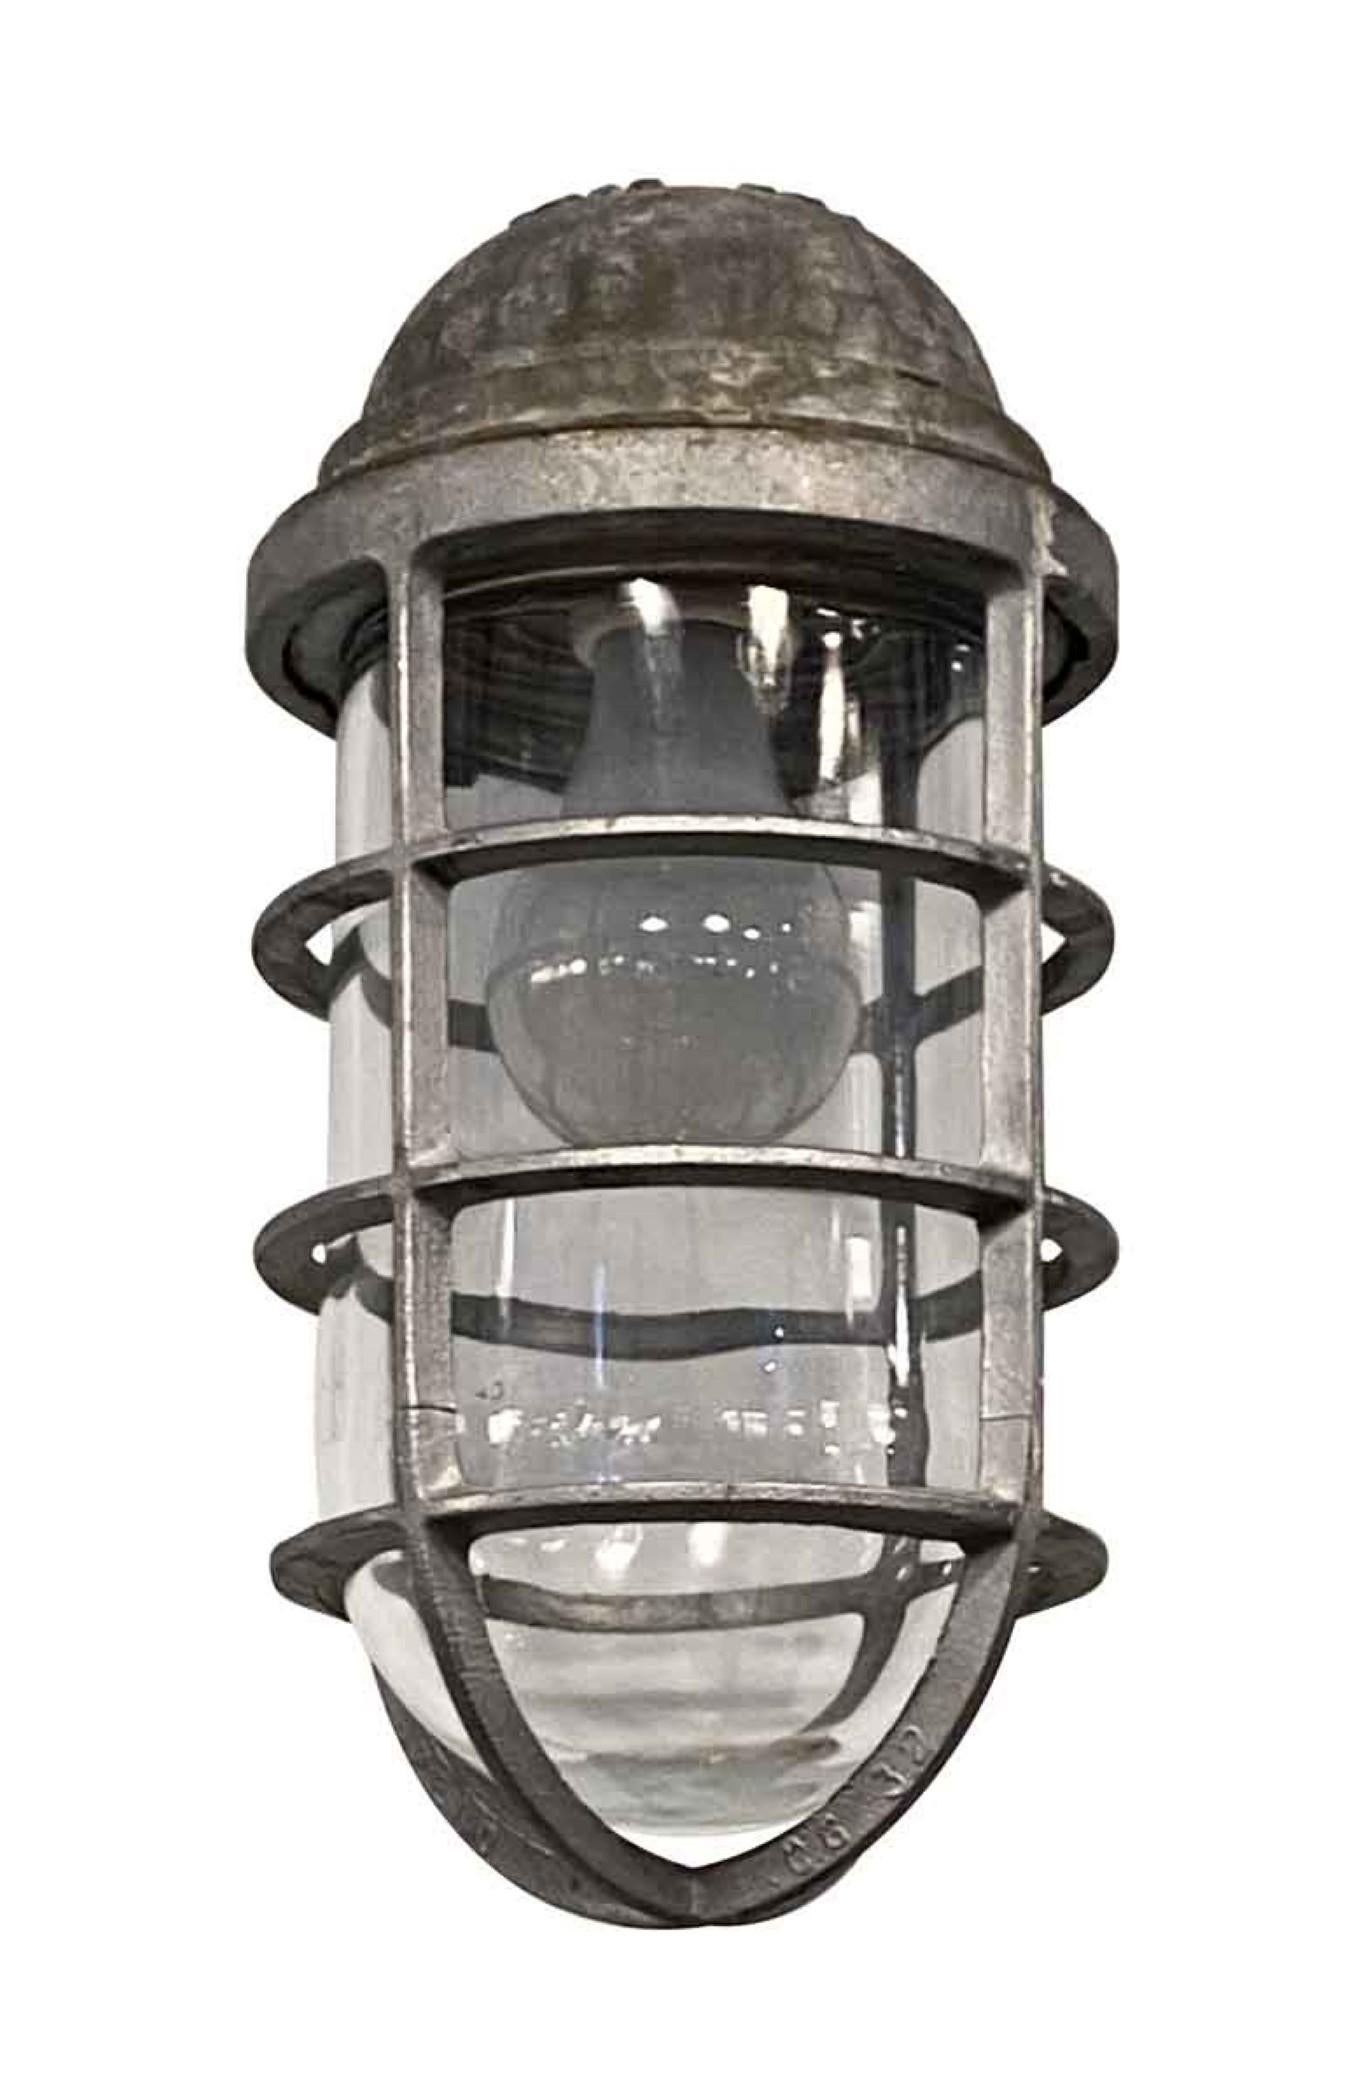 Explosion Proof style wall mount Cage Light Fixture Retro Industrial Commercial 